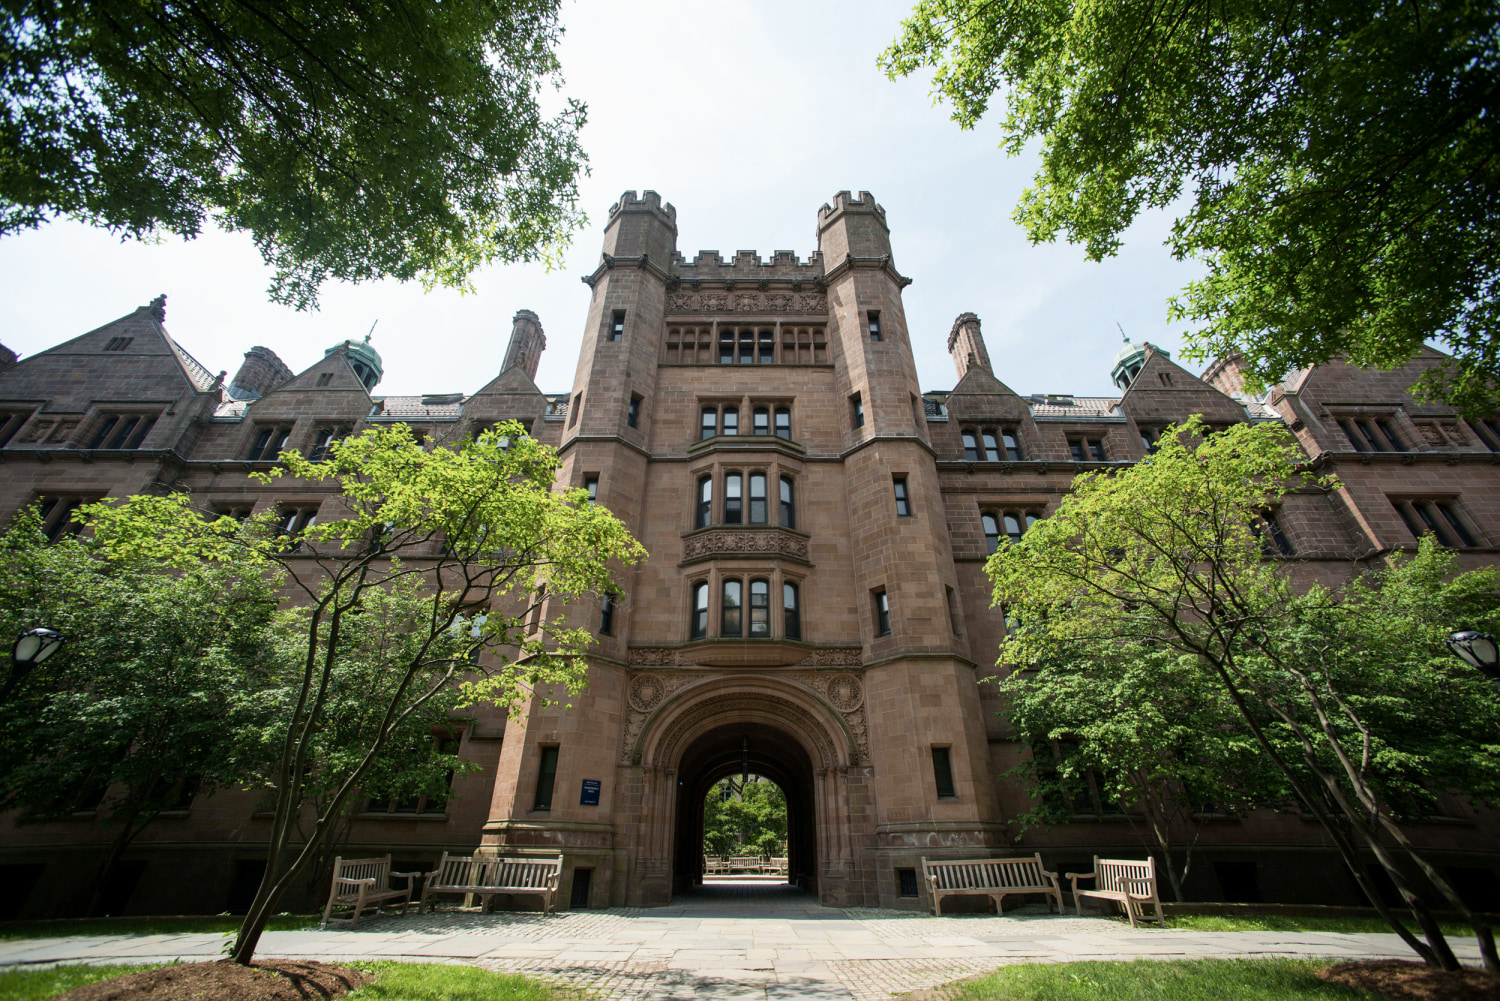 THE IVY LEAGUE UNIVERSITIES IN USA